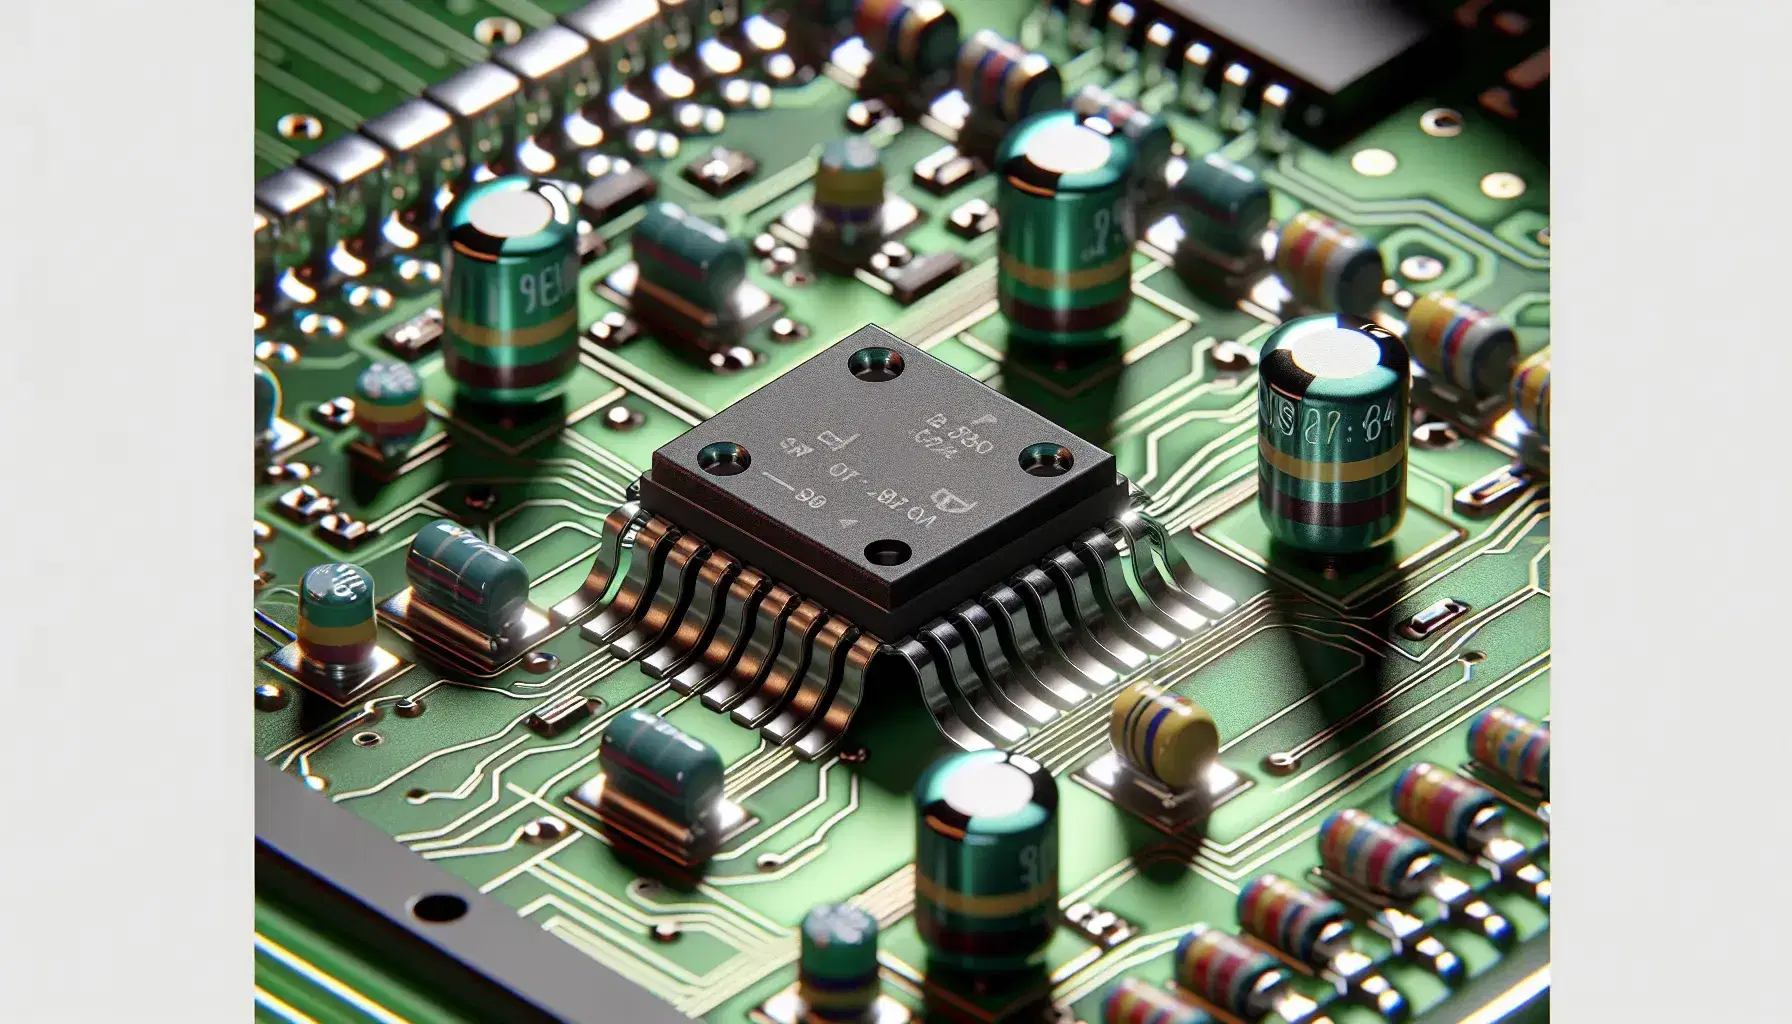 Close-up of an XOR integrated circuit on green PCB board with electronic components such as colored resistors and blue and yellow capacitors.